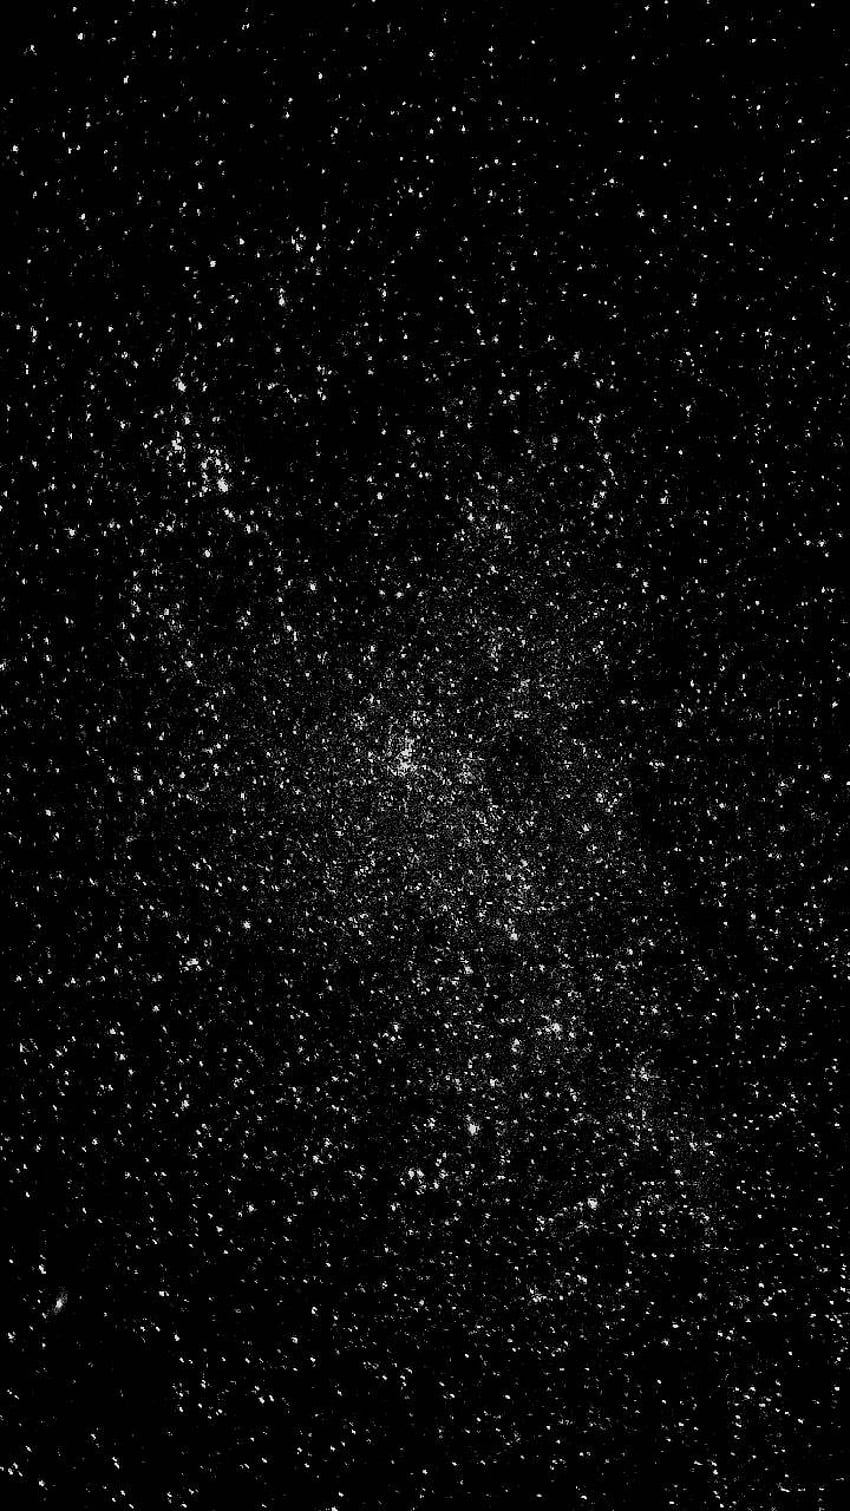 Galaxy wallpaper Black and White Stock Photos  Images  Alamy